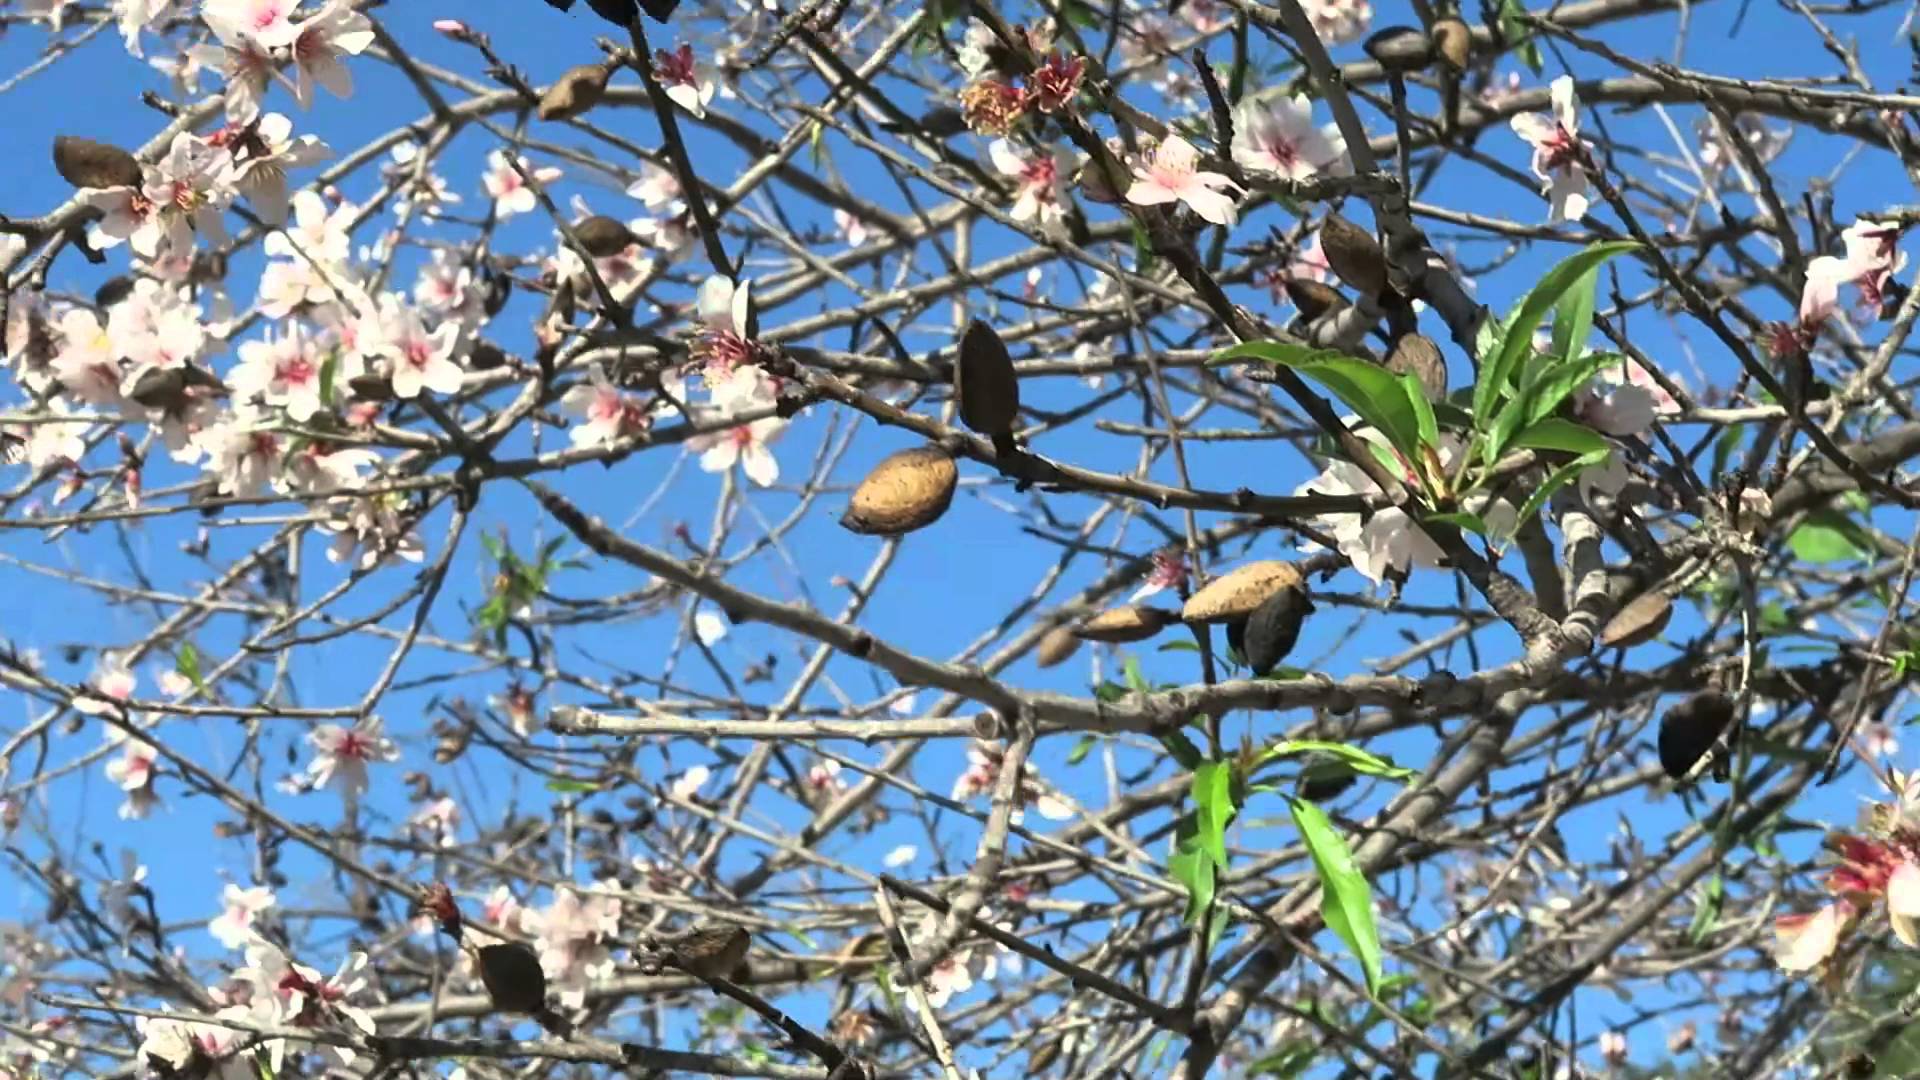 Almond trees blossoming in Spain - YouTube